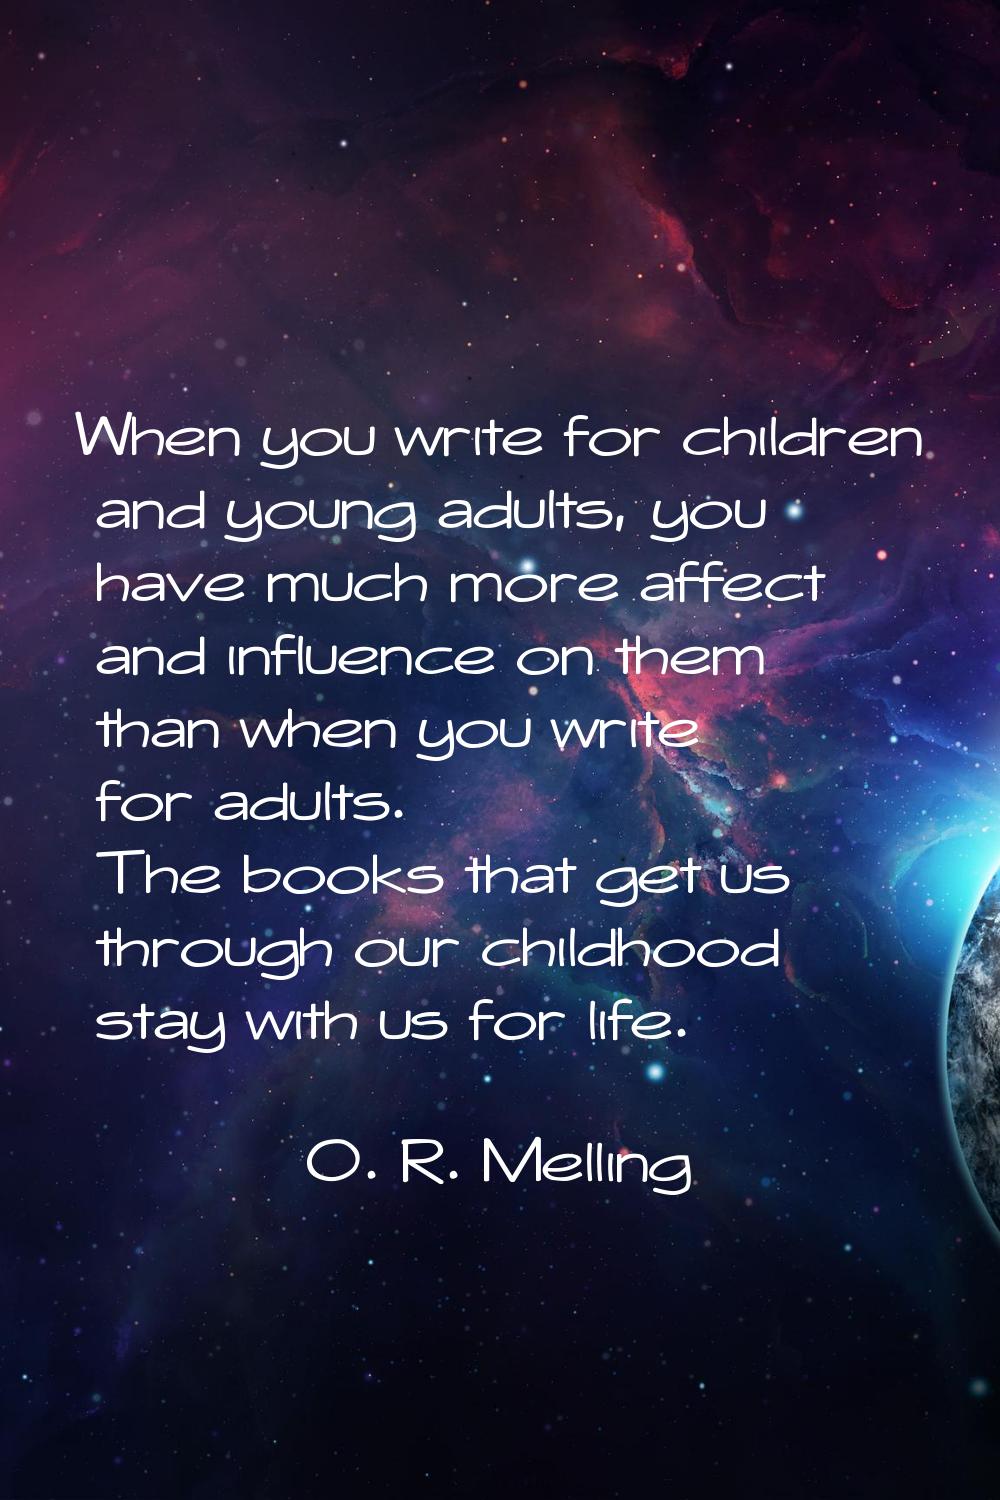 When you write for children and young adults, you have much more affect and influence on them than 